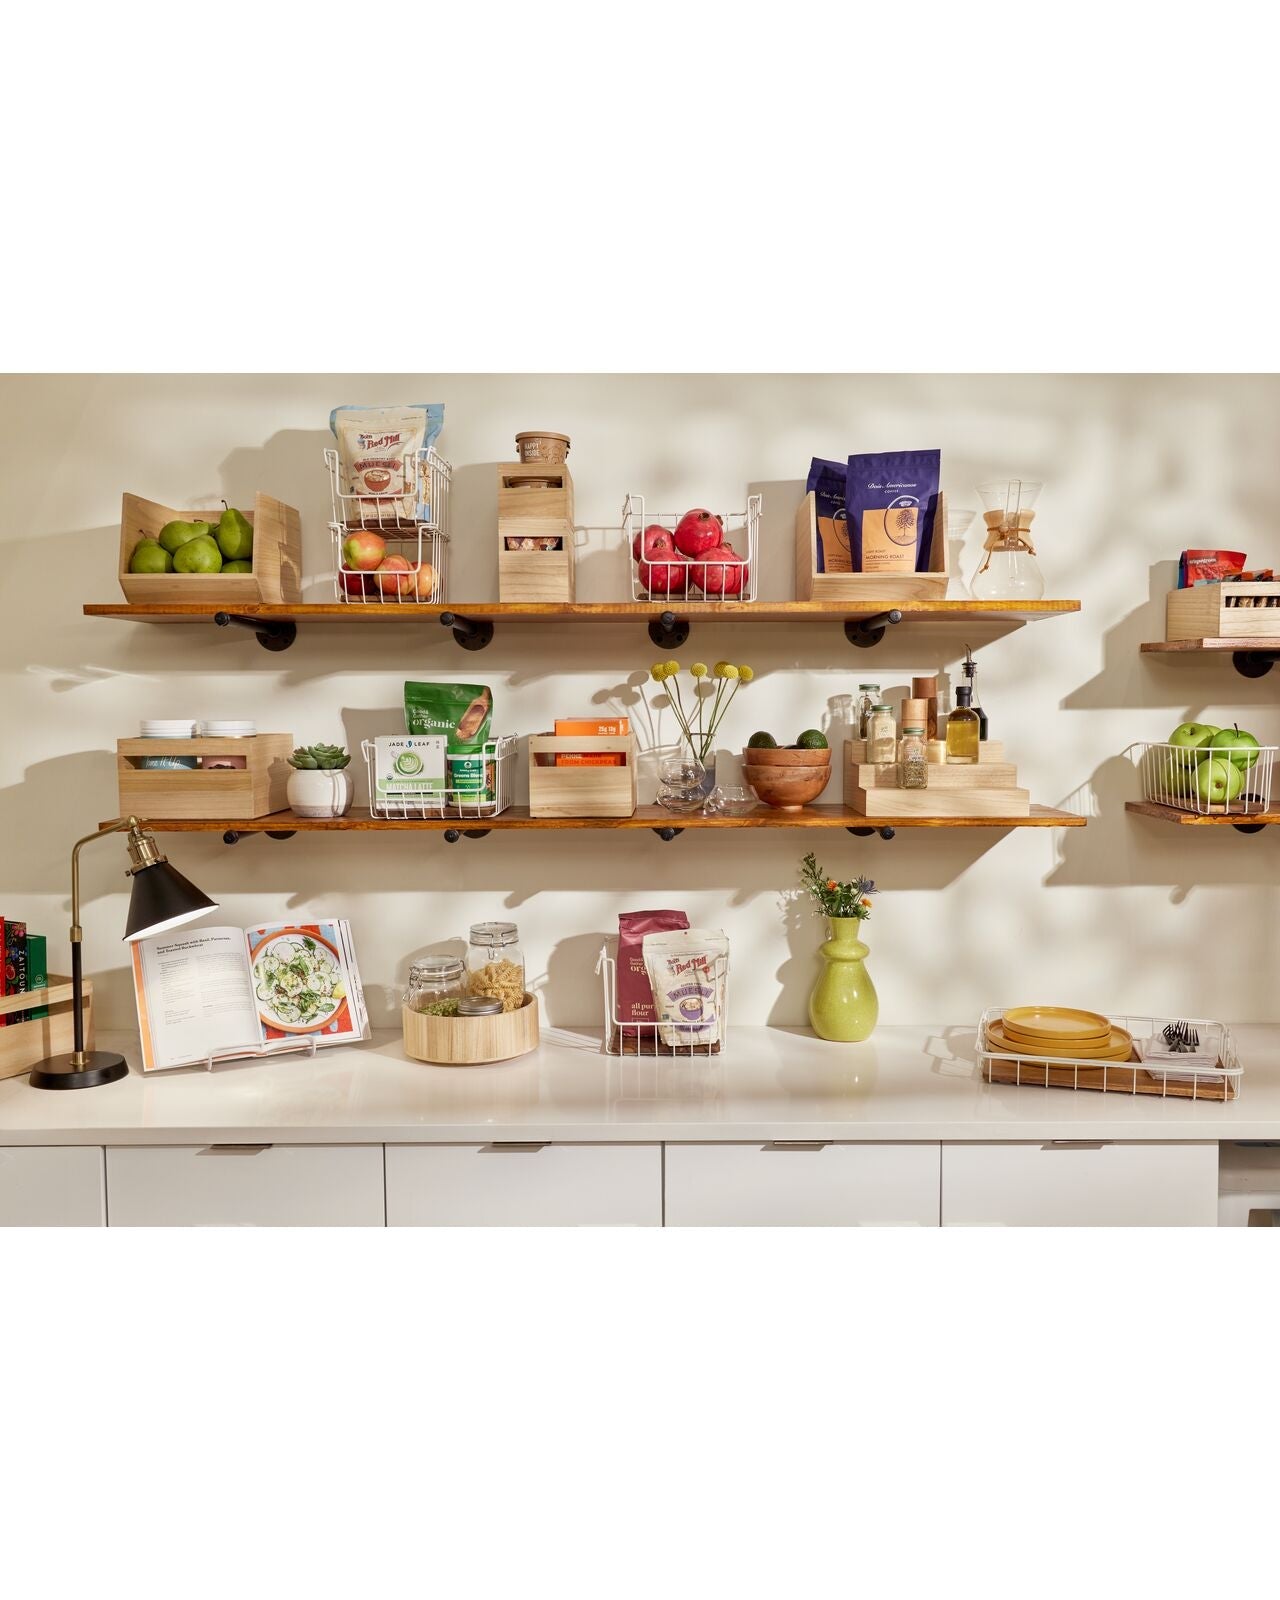 iDesign 9-Piece Recycled White Stacking Kitchen and Pantry Storage Set